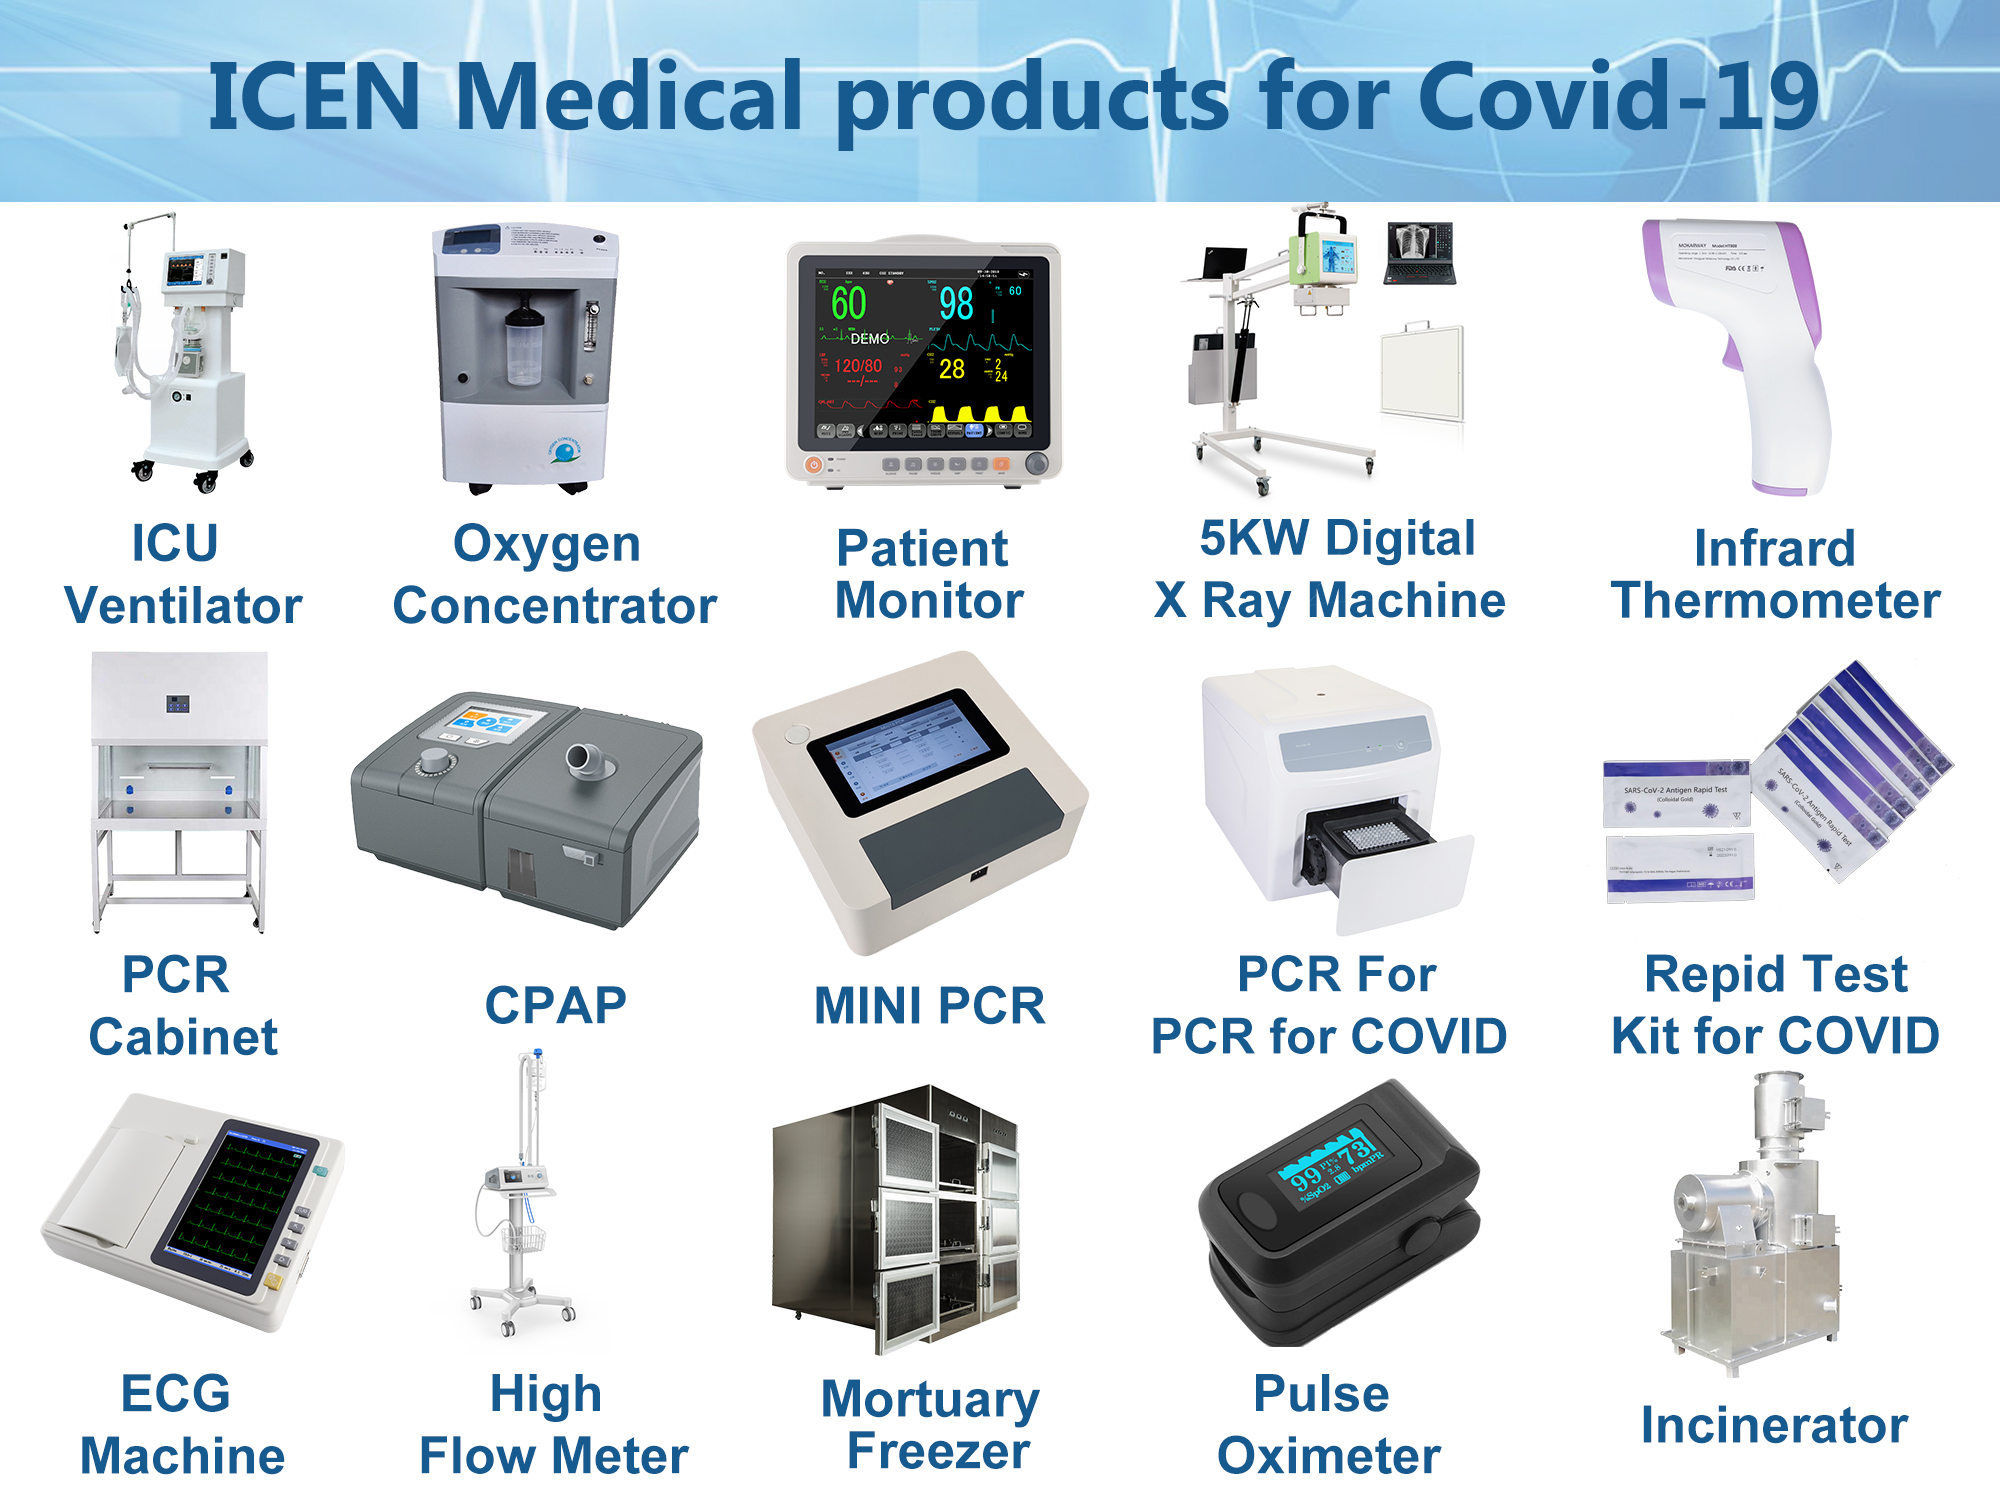 ICEN Medical products for Covid-19